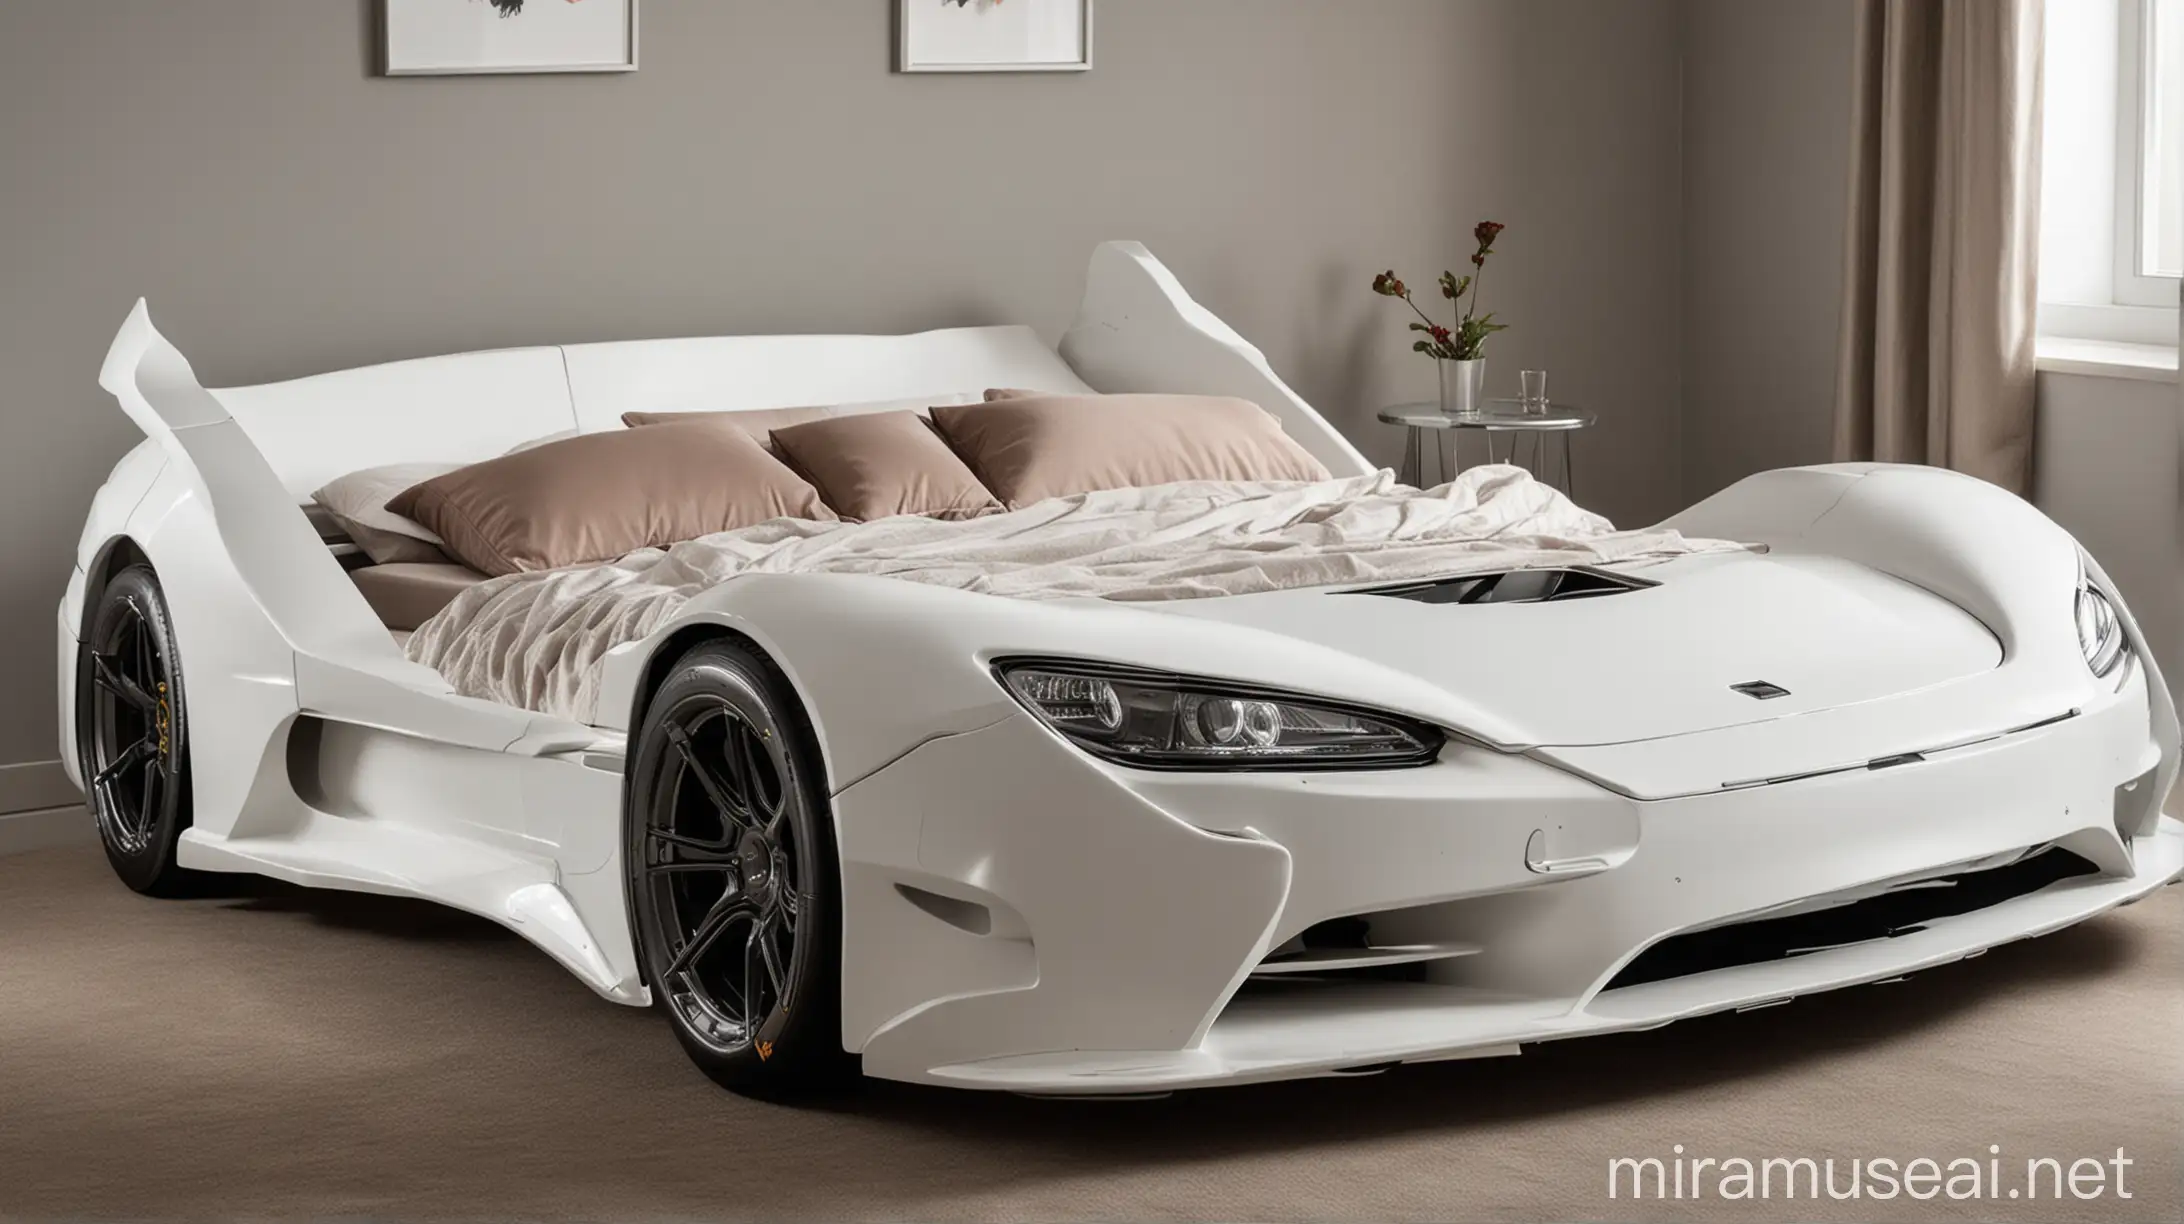 A A double bed in the shape of a mclaren car